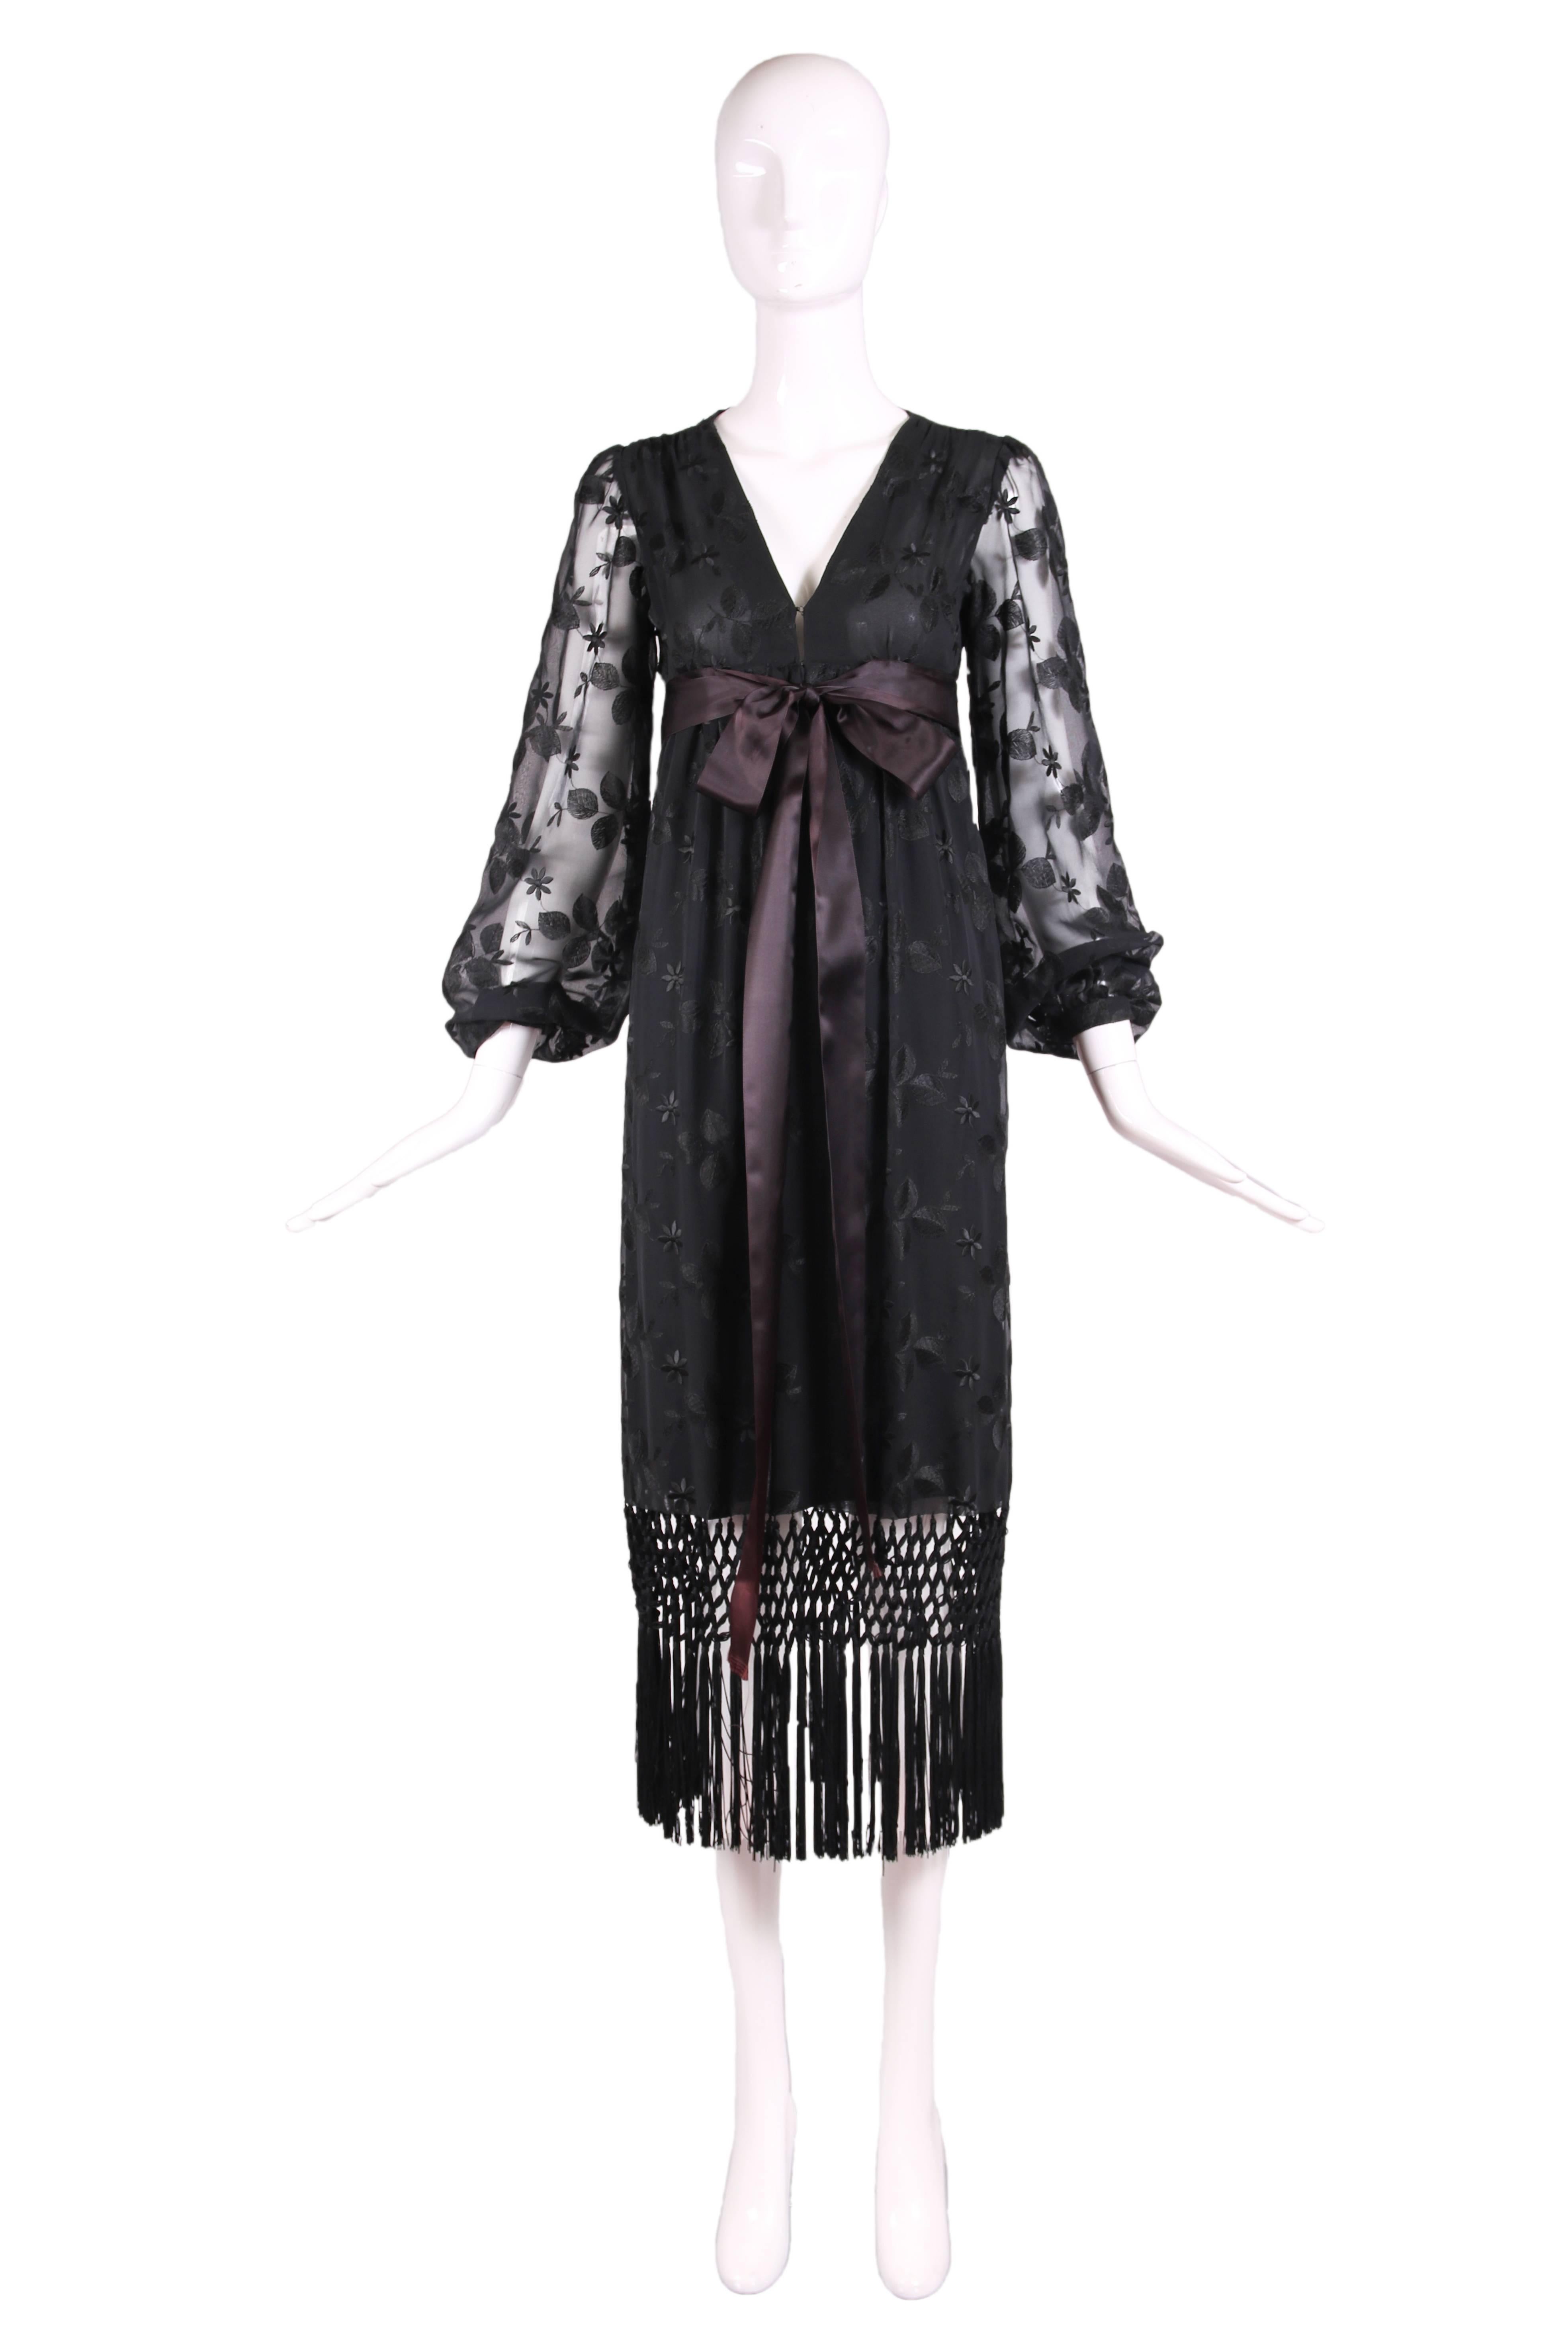 Vintage Givenchy haute couture black chiffon embroidered gown featuring macrame fringe detail and satin ribbon bow at empire waist. The dress has a V-neckline and sheer chiffon sleeves. Lined in black silk at bodice and bust is double-lined in sheer